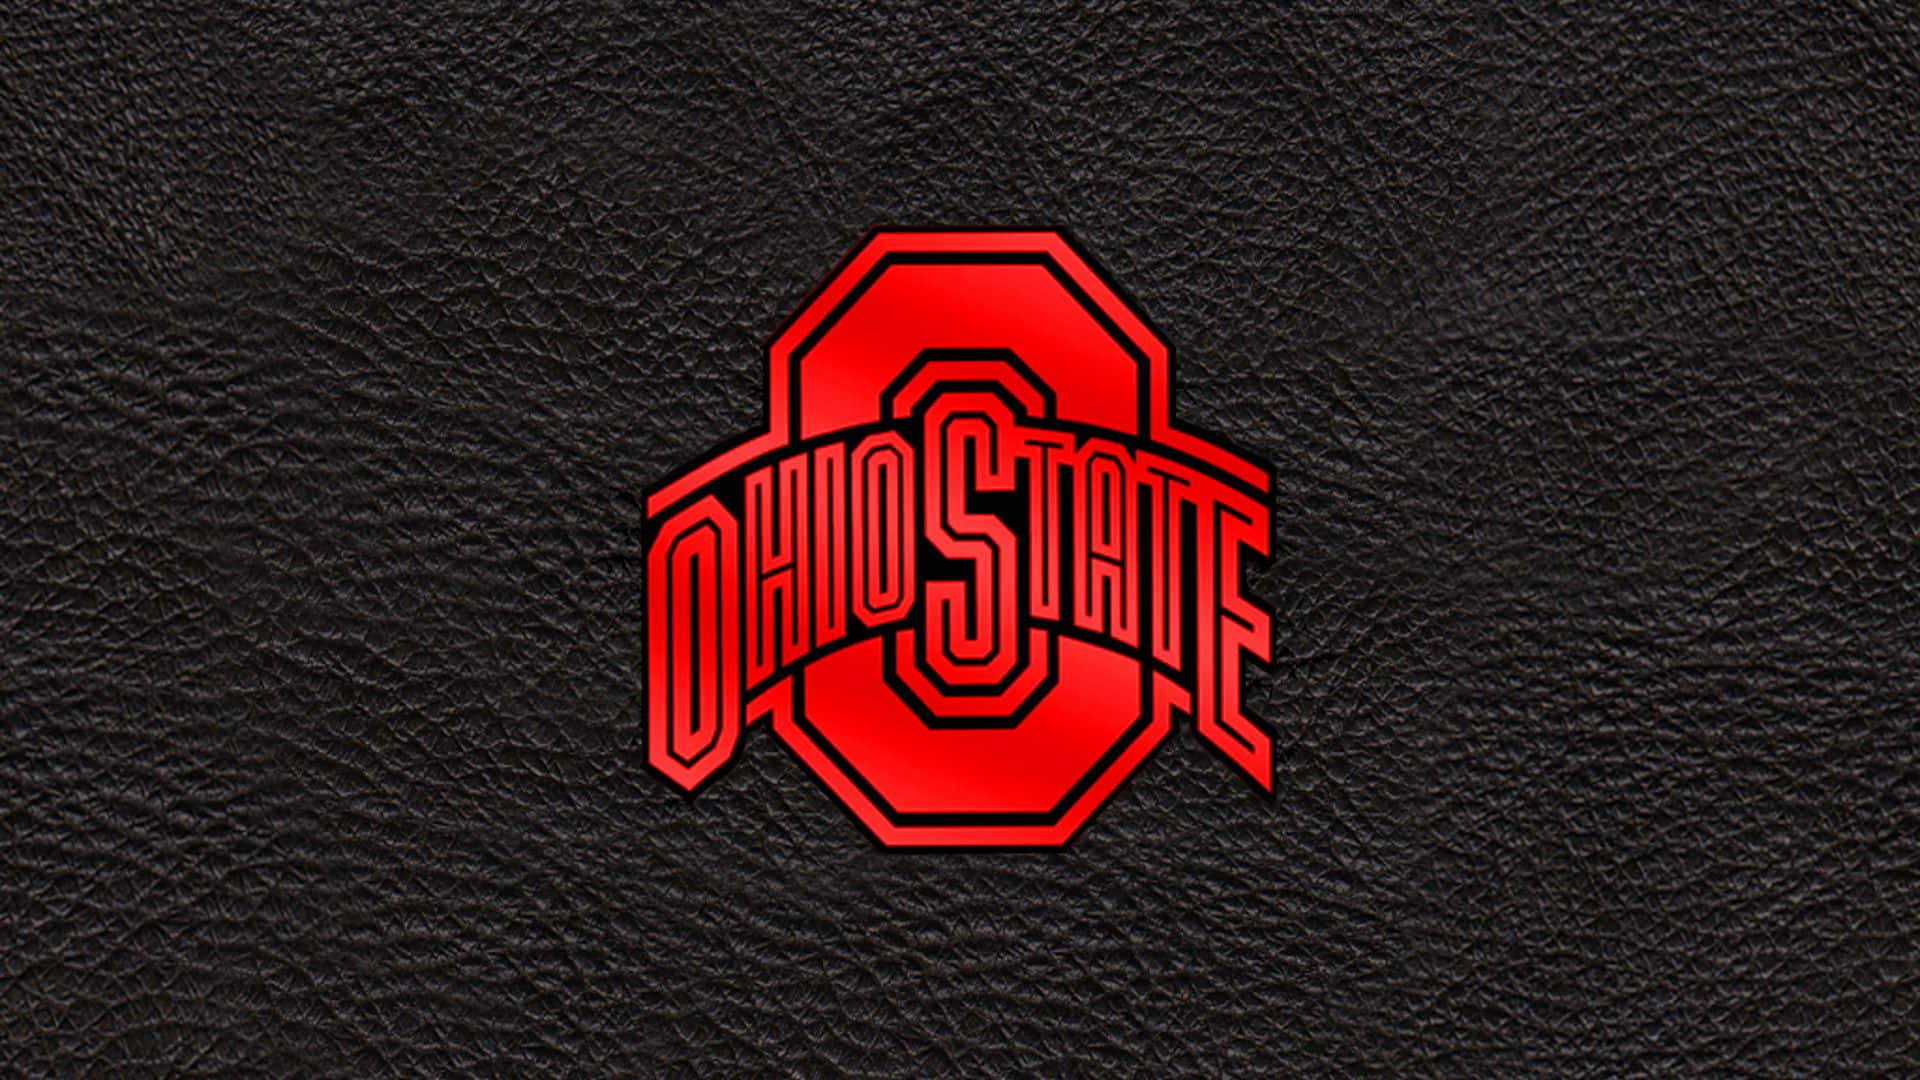 All Red Ohio State Logo Wallpaper